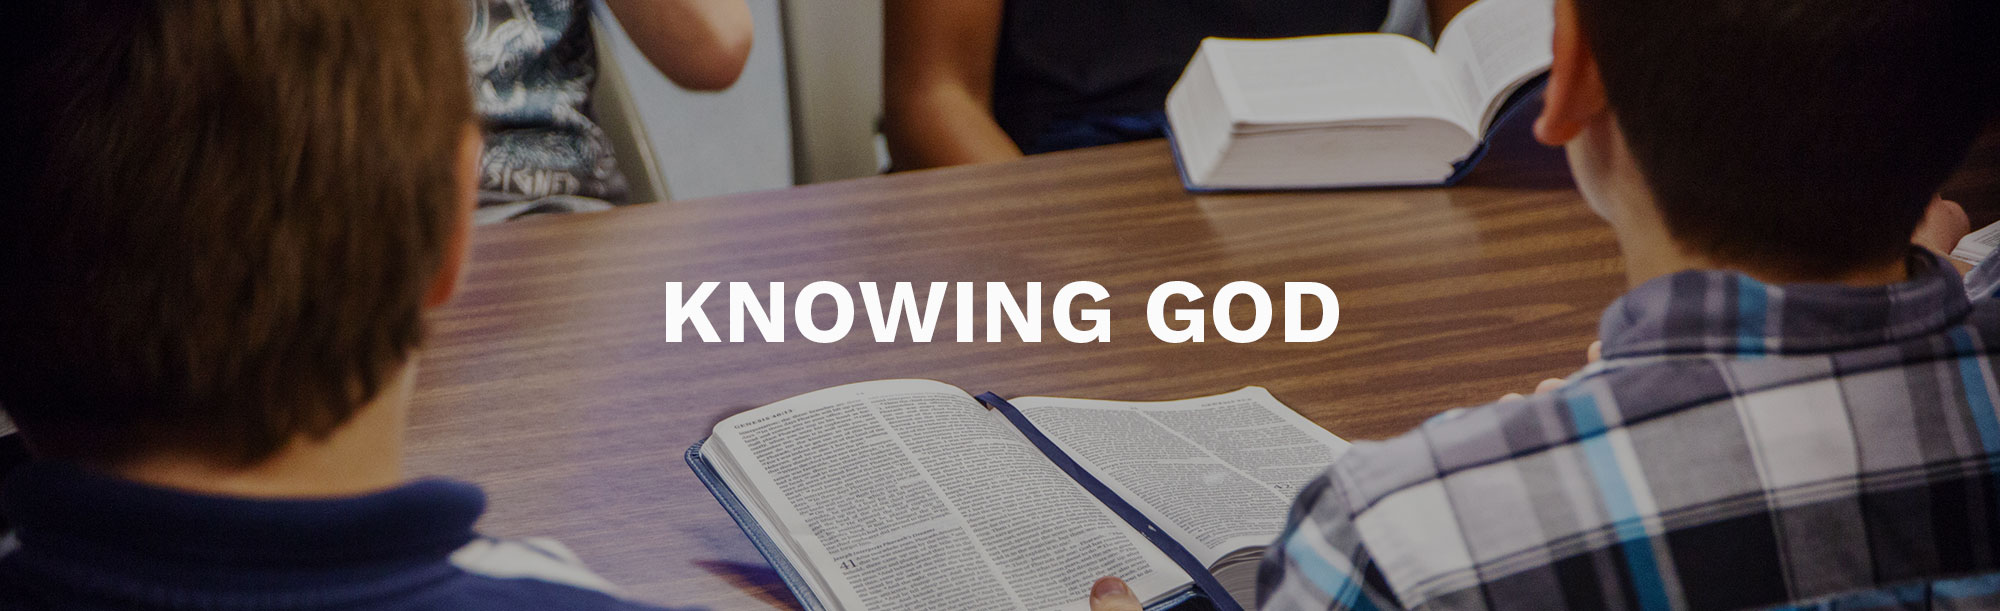 KNOW GOD PAGE